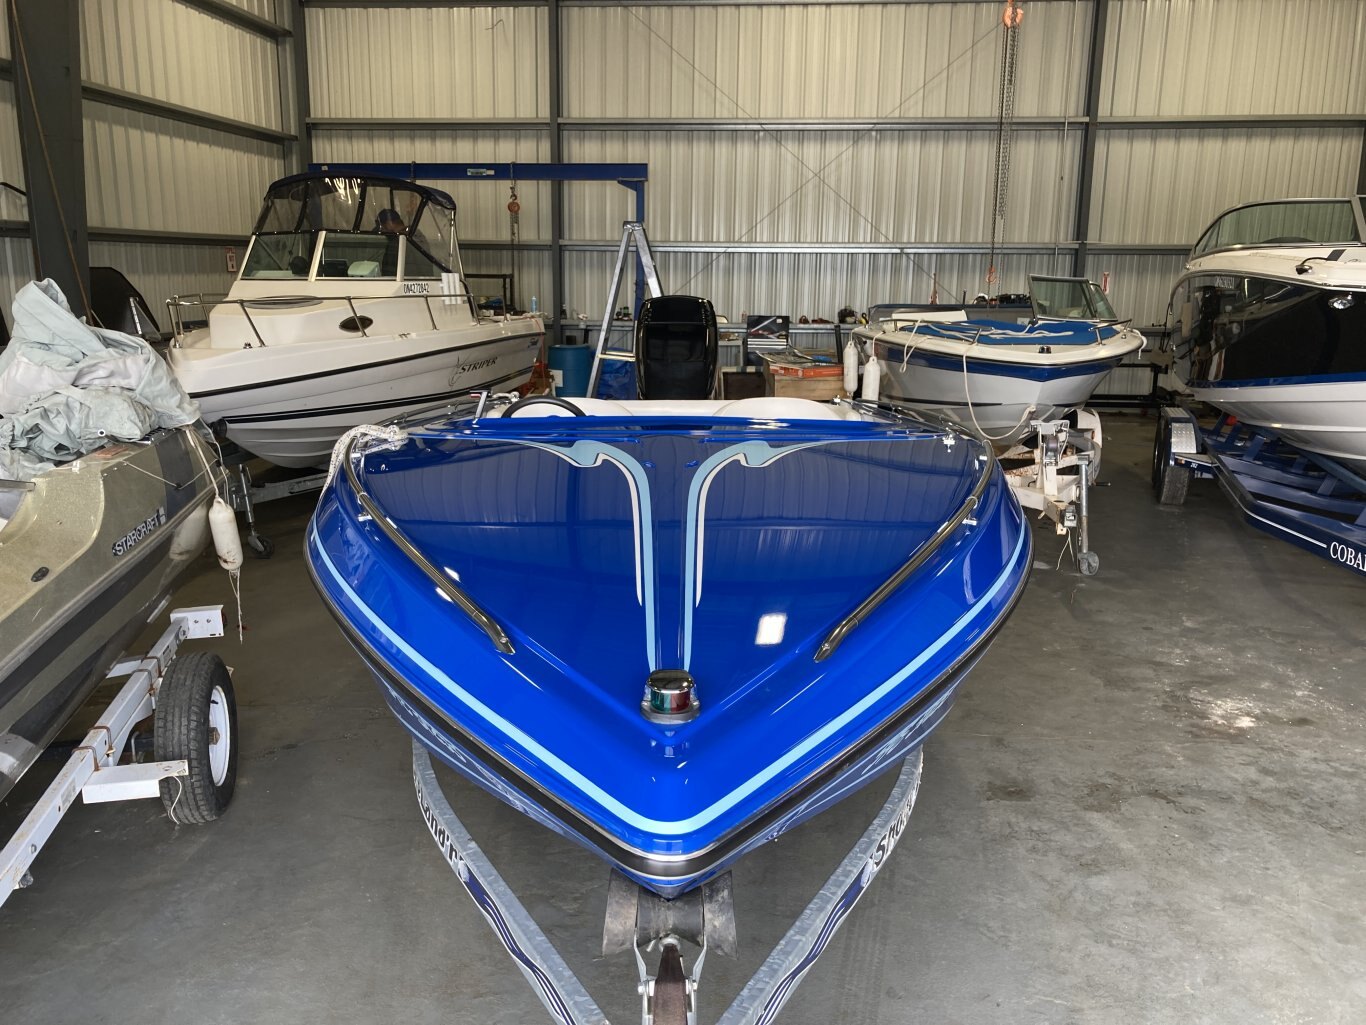 Checkmate Pulse 170 w/200hp Merc OB and Trailer